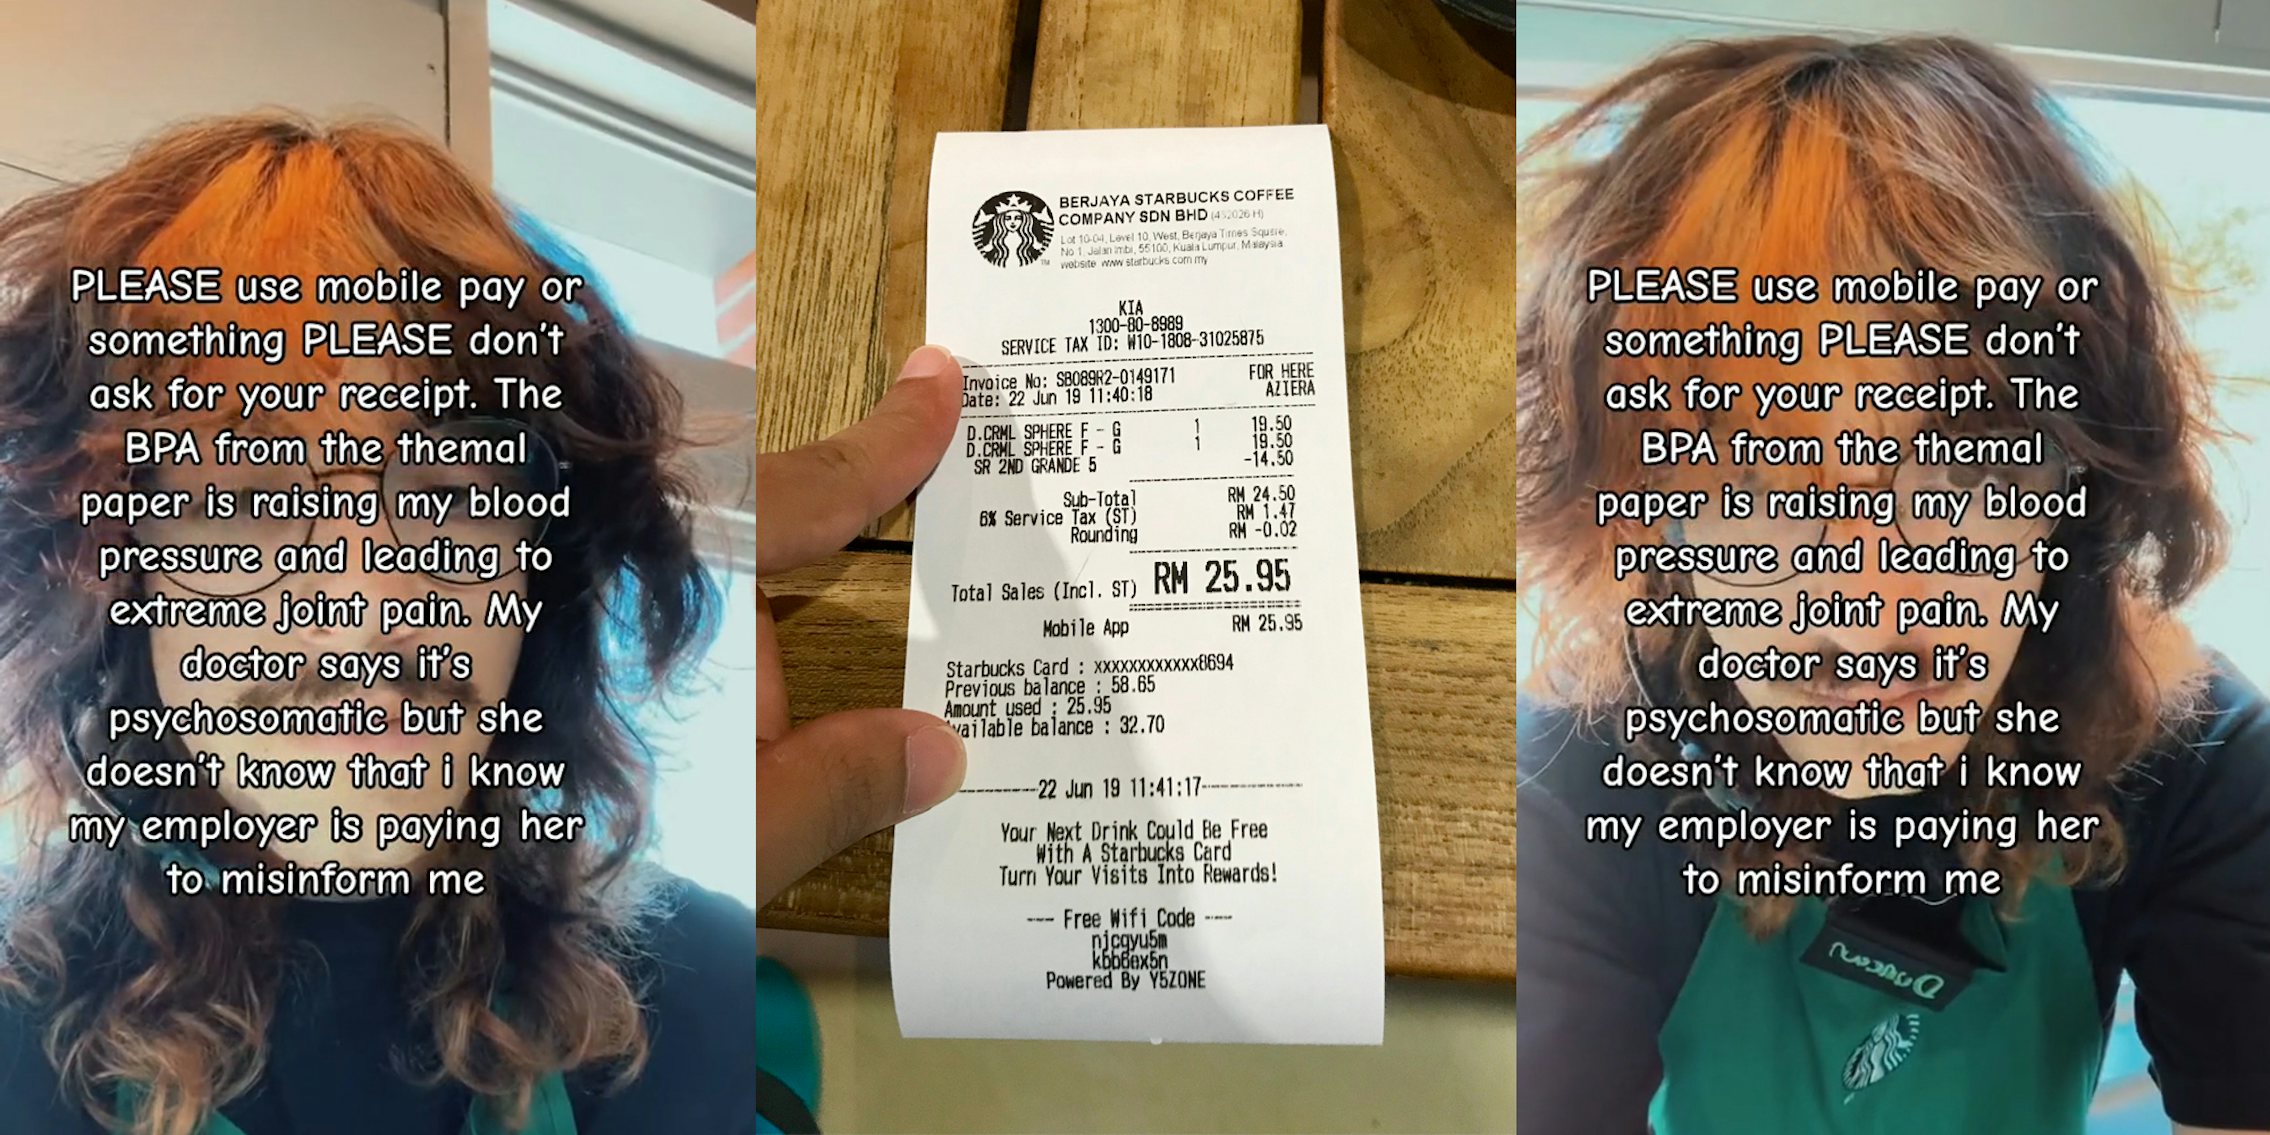 Starbucks barista with caption 'PLEASE use mobile pay or something PLEASE don't ask for your receipt. The BPA from the thermal paper is raising my blood pressure and leading to extreme joint pain. My doctor says it's psychosomatic but she doesn't know that I know my employer is paying her to misinform me' (l) Starbucks receipt on wooden table (c) Starbucks barista with caption 'PLEASE use mobile pay or something PLEASE don't ask for your receipt. The BPA from the thermal paper is raising my blood pressure and leading to extreme joint pain. My doctor says it's psychosomatic but she doesn't know that I know my employer is paying her to misinform me' (r)